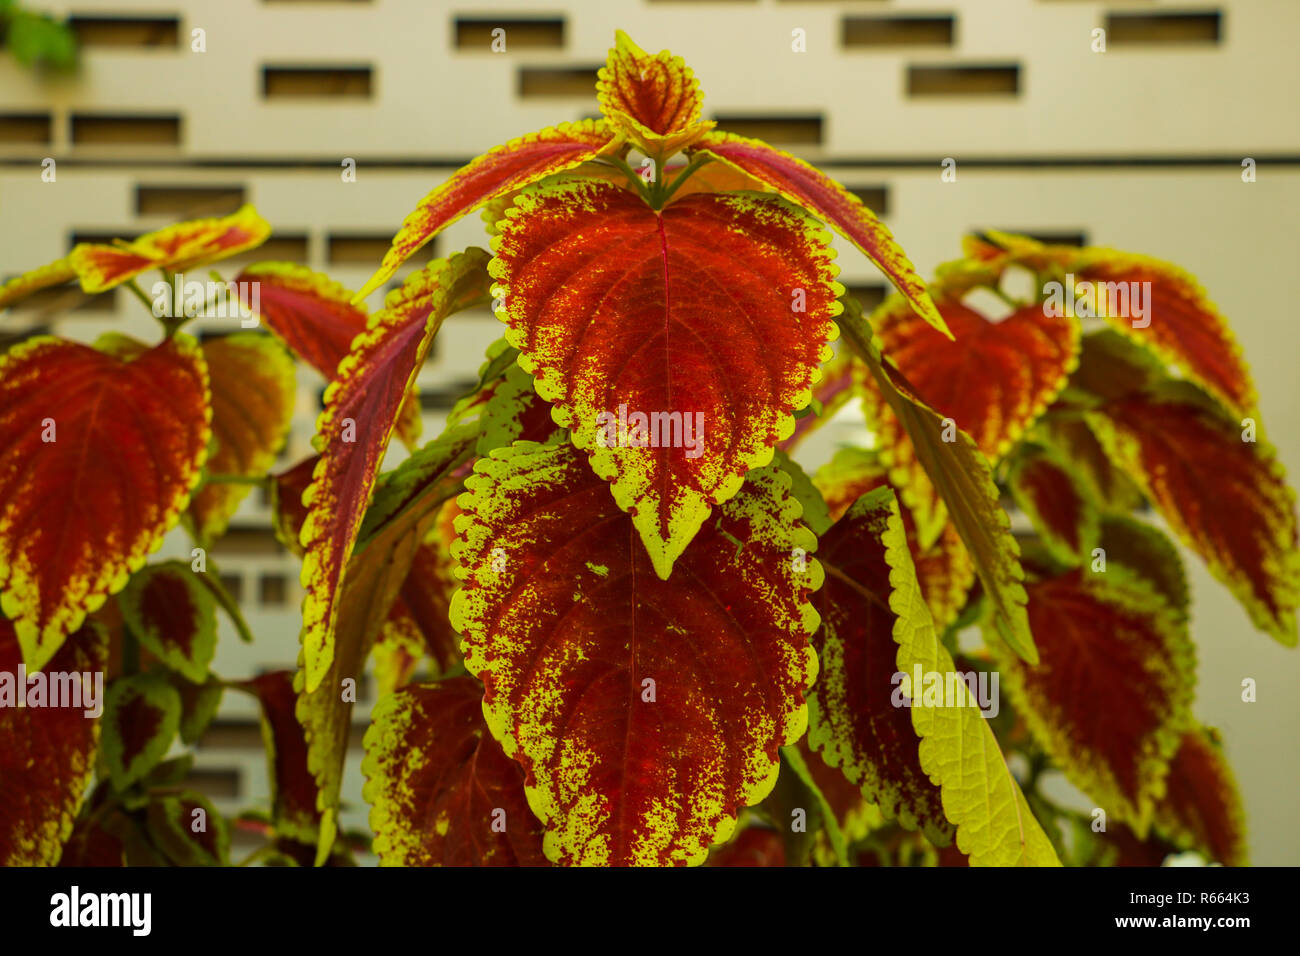 Begonia in flowerpot on wooden background. Genus of perennial flowering plants in the family Begoniaceae Stock Photo